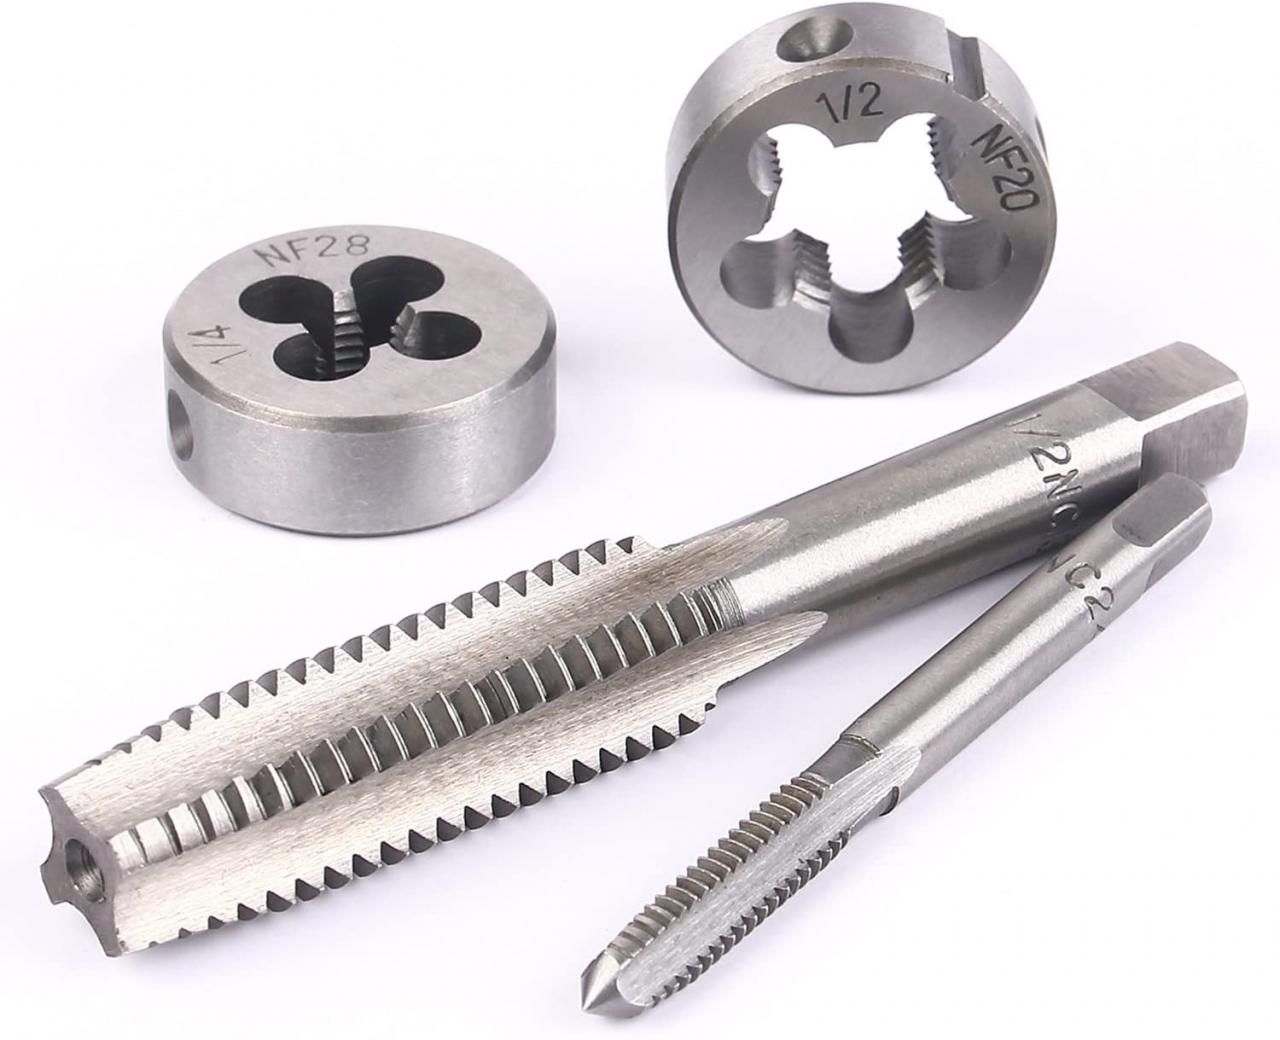 Efficere 40 Piece Tap And Die Set · The Car Devices